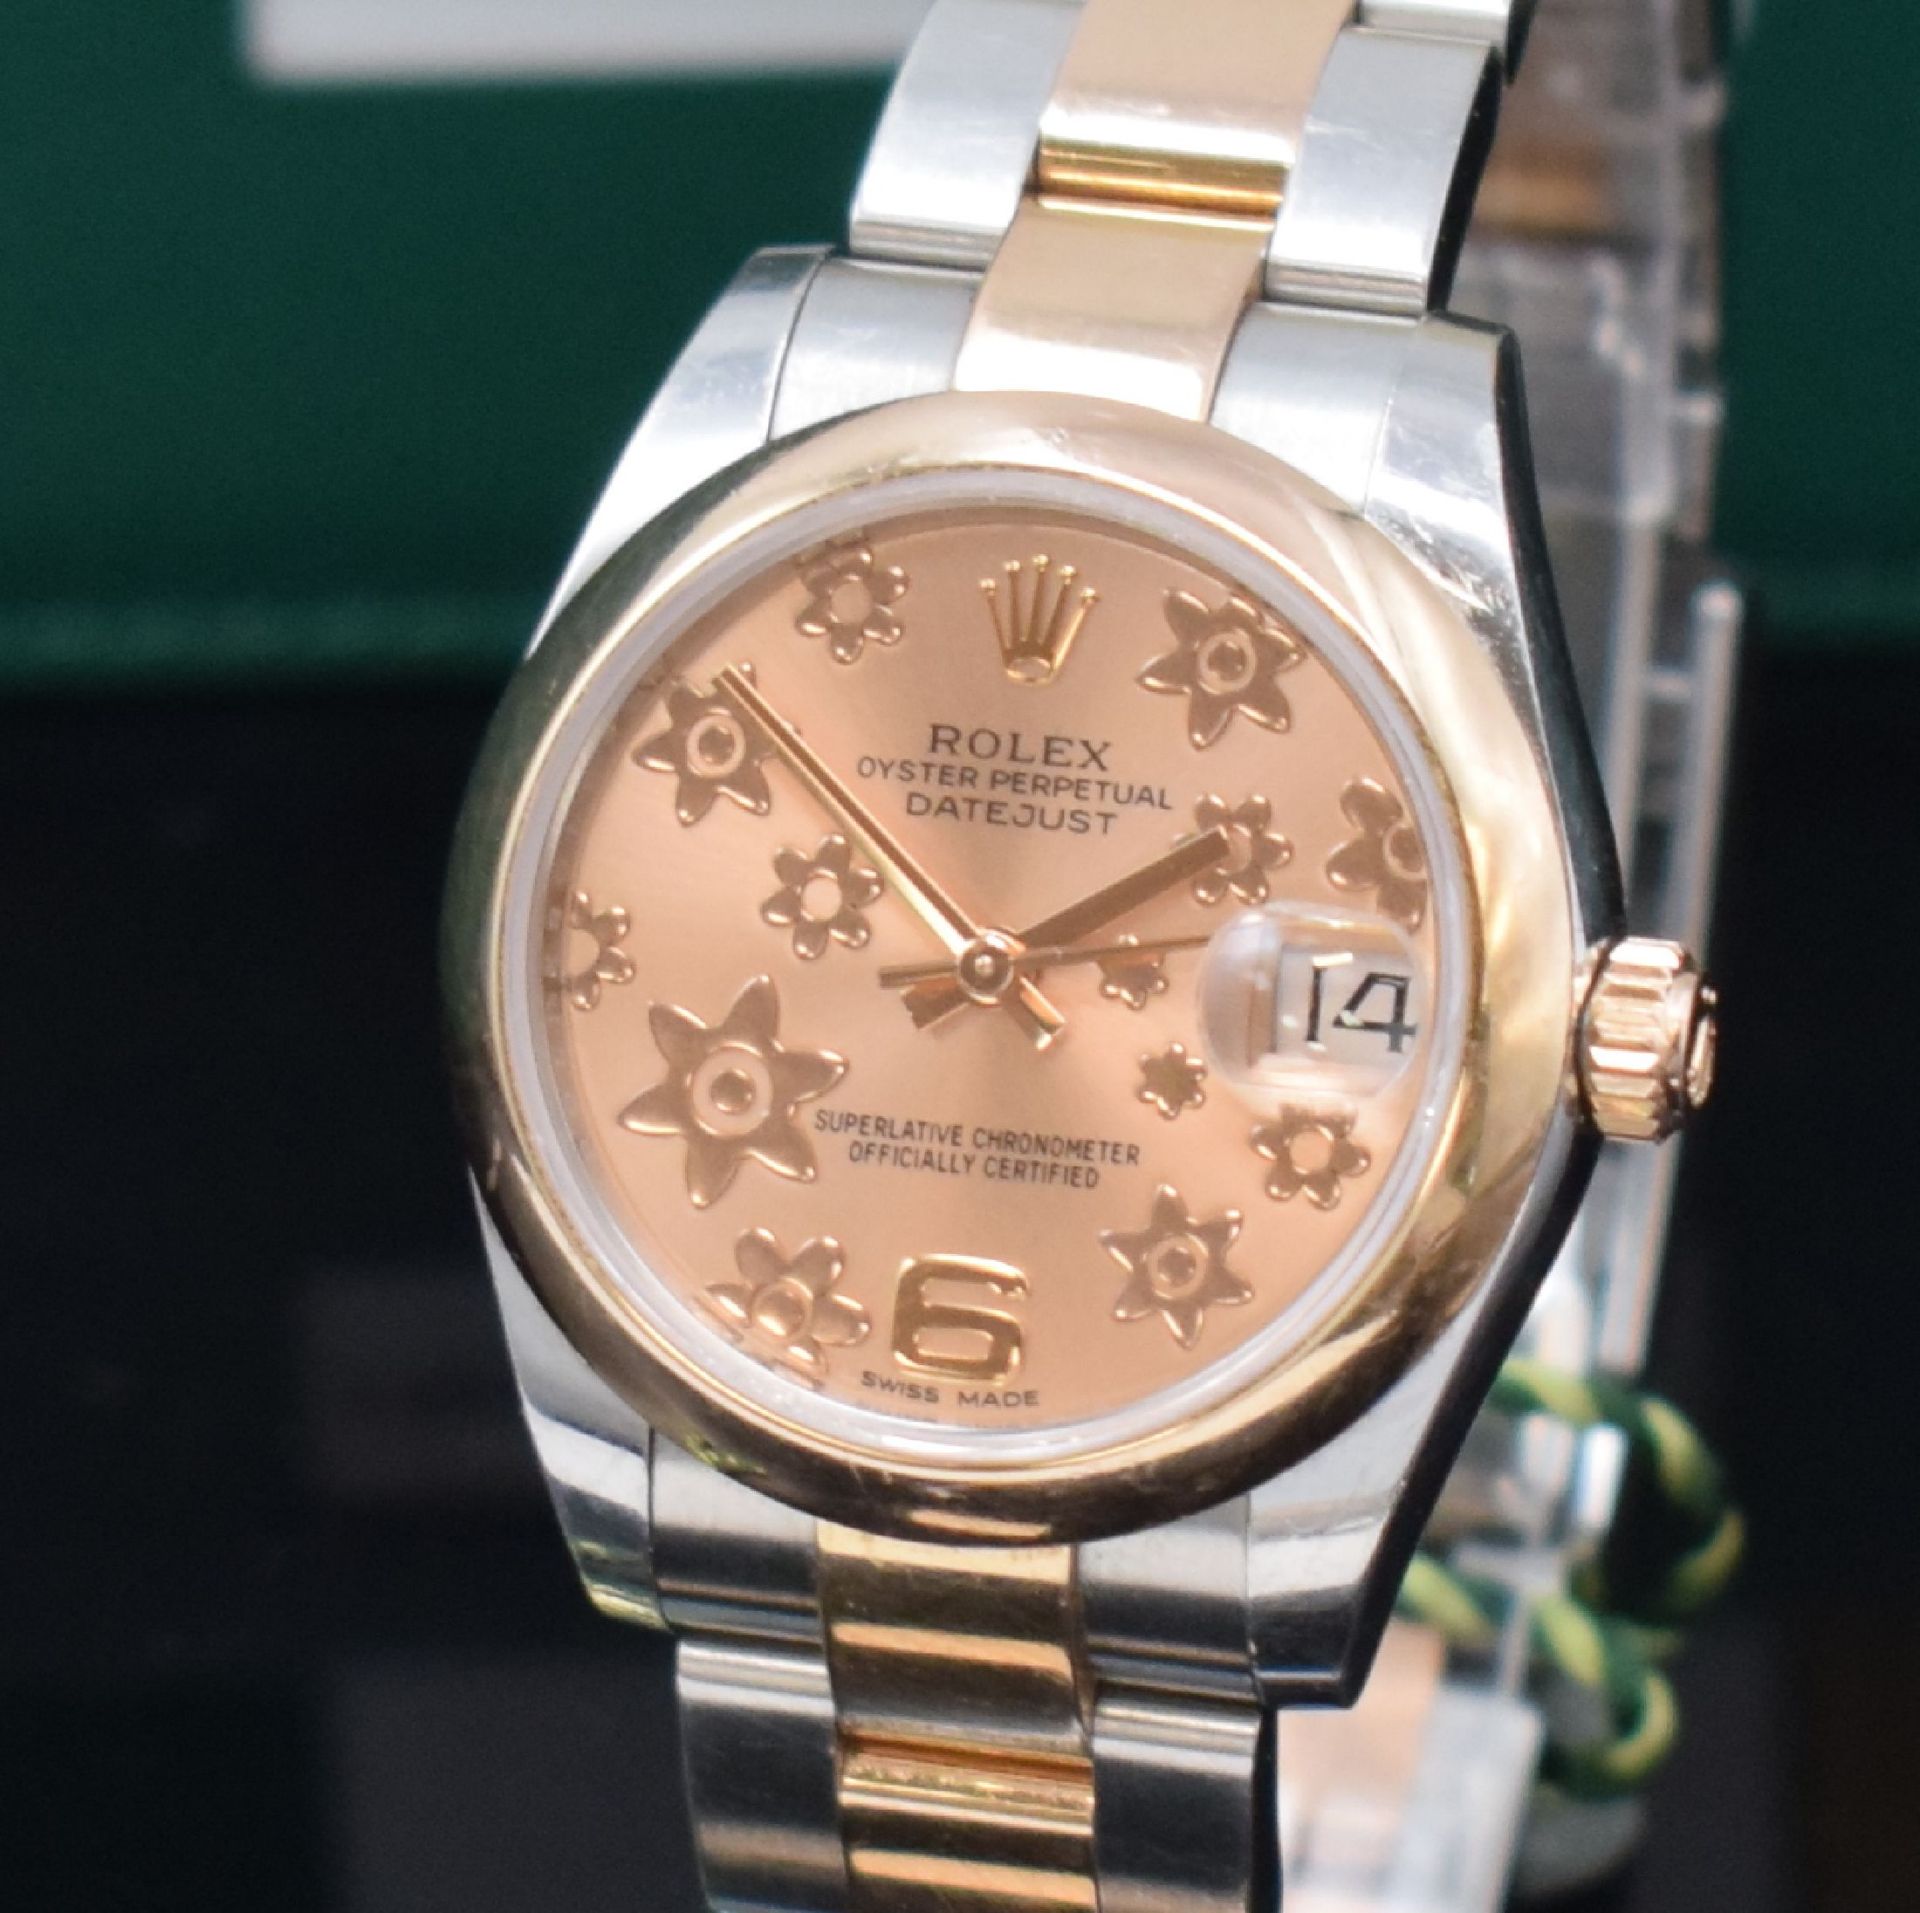 ROLEX Armbanduhr Oyster Perpetual Datejust Referenz - Image 3 of 7